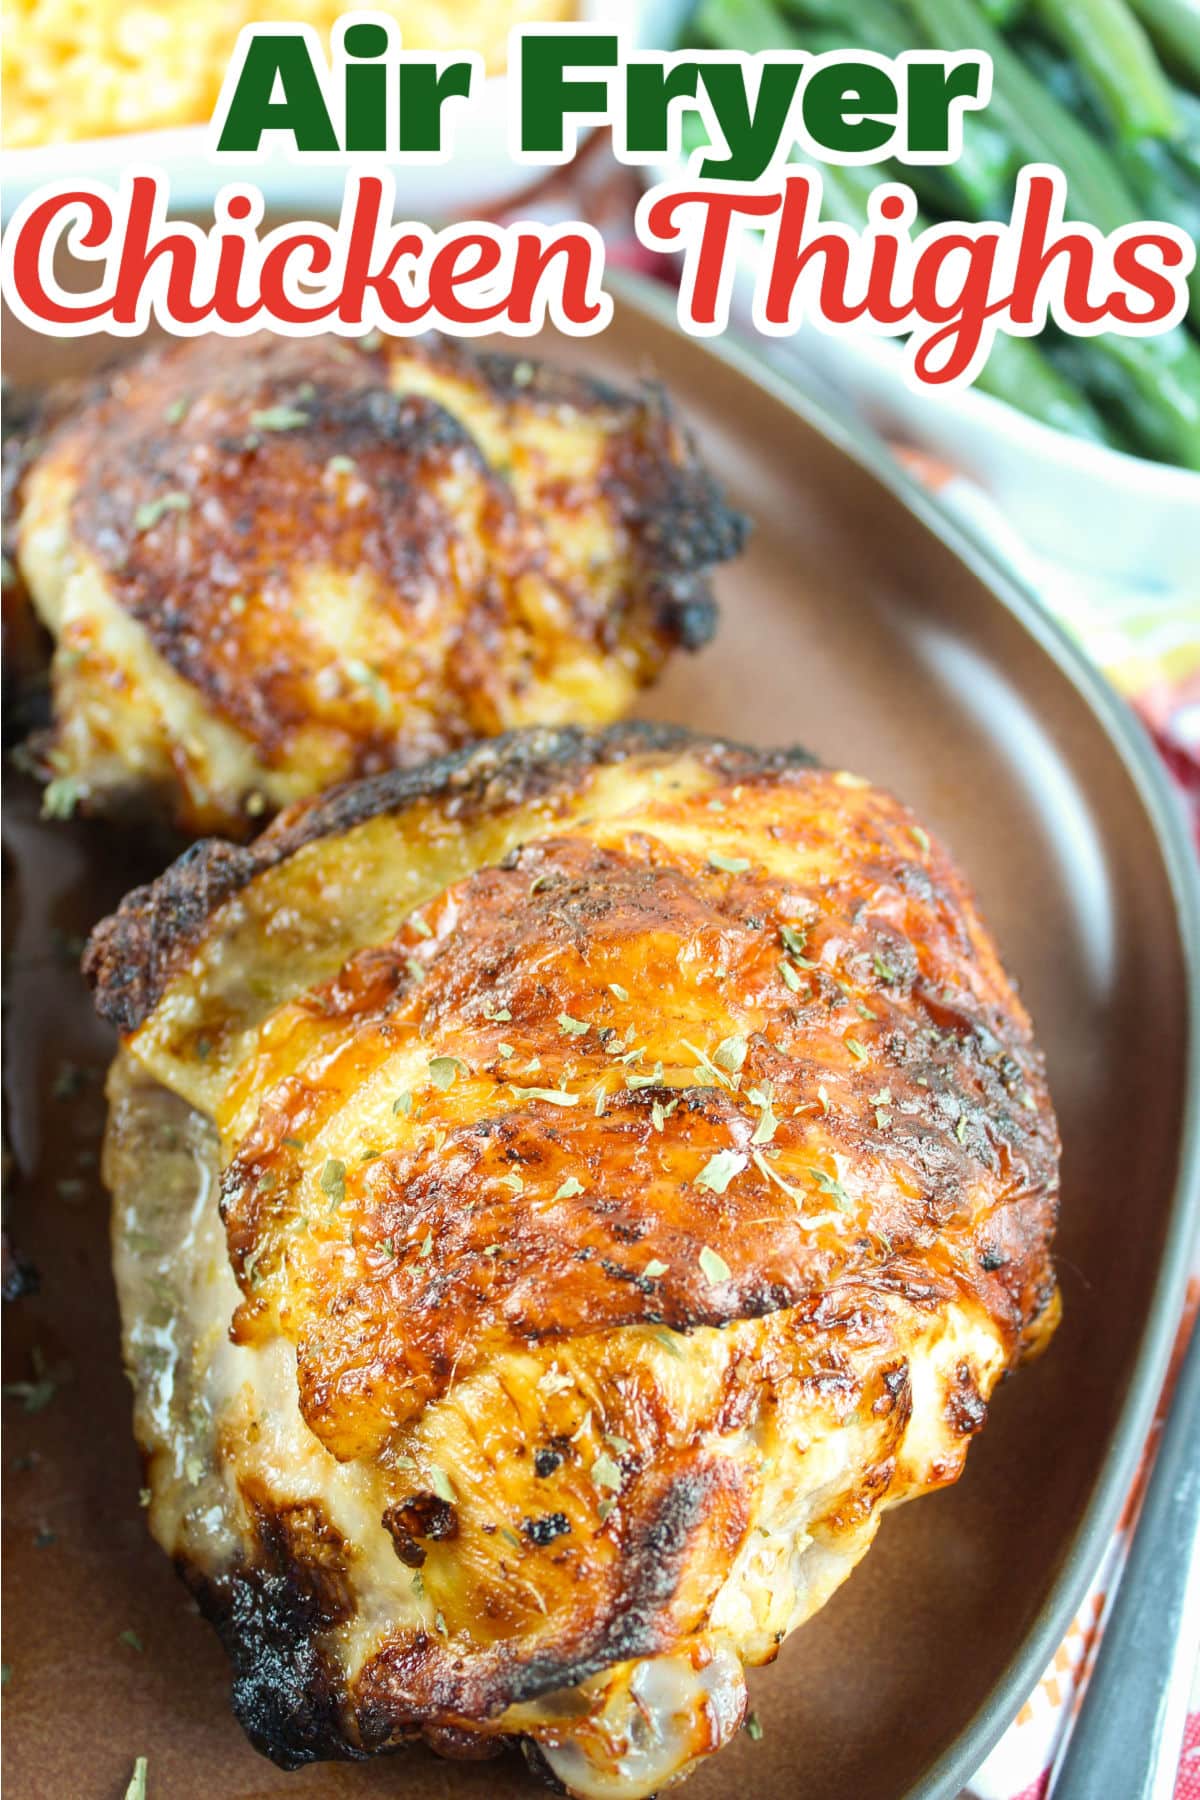 Marinated Chicken Thighs in the air fryer are the perfect dinner! They are extremely juicy with that crispy skin - which holds in all that delicious flavor from the Italian marinade.   via @foodhussy